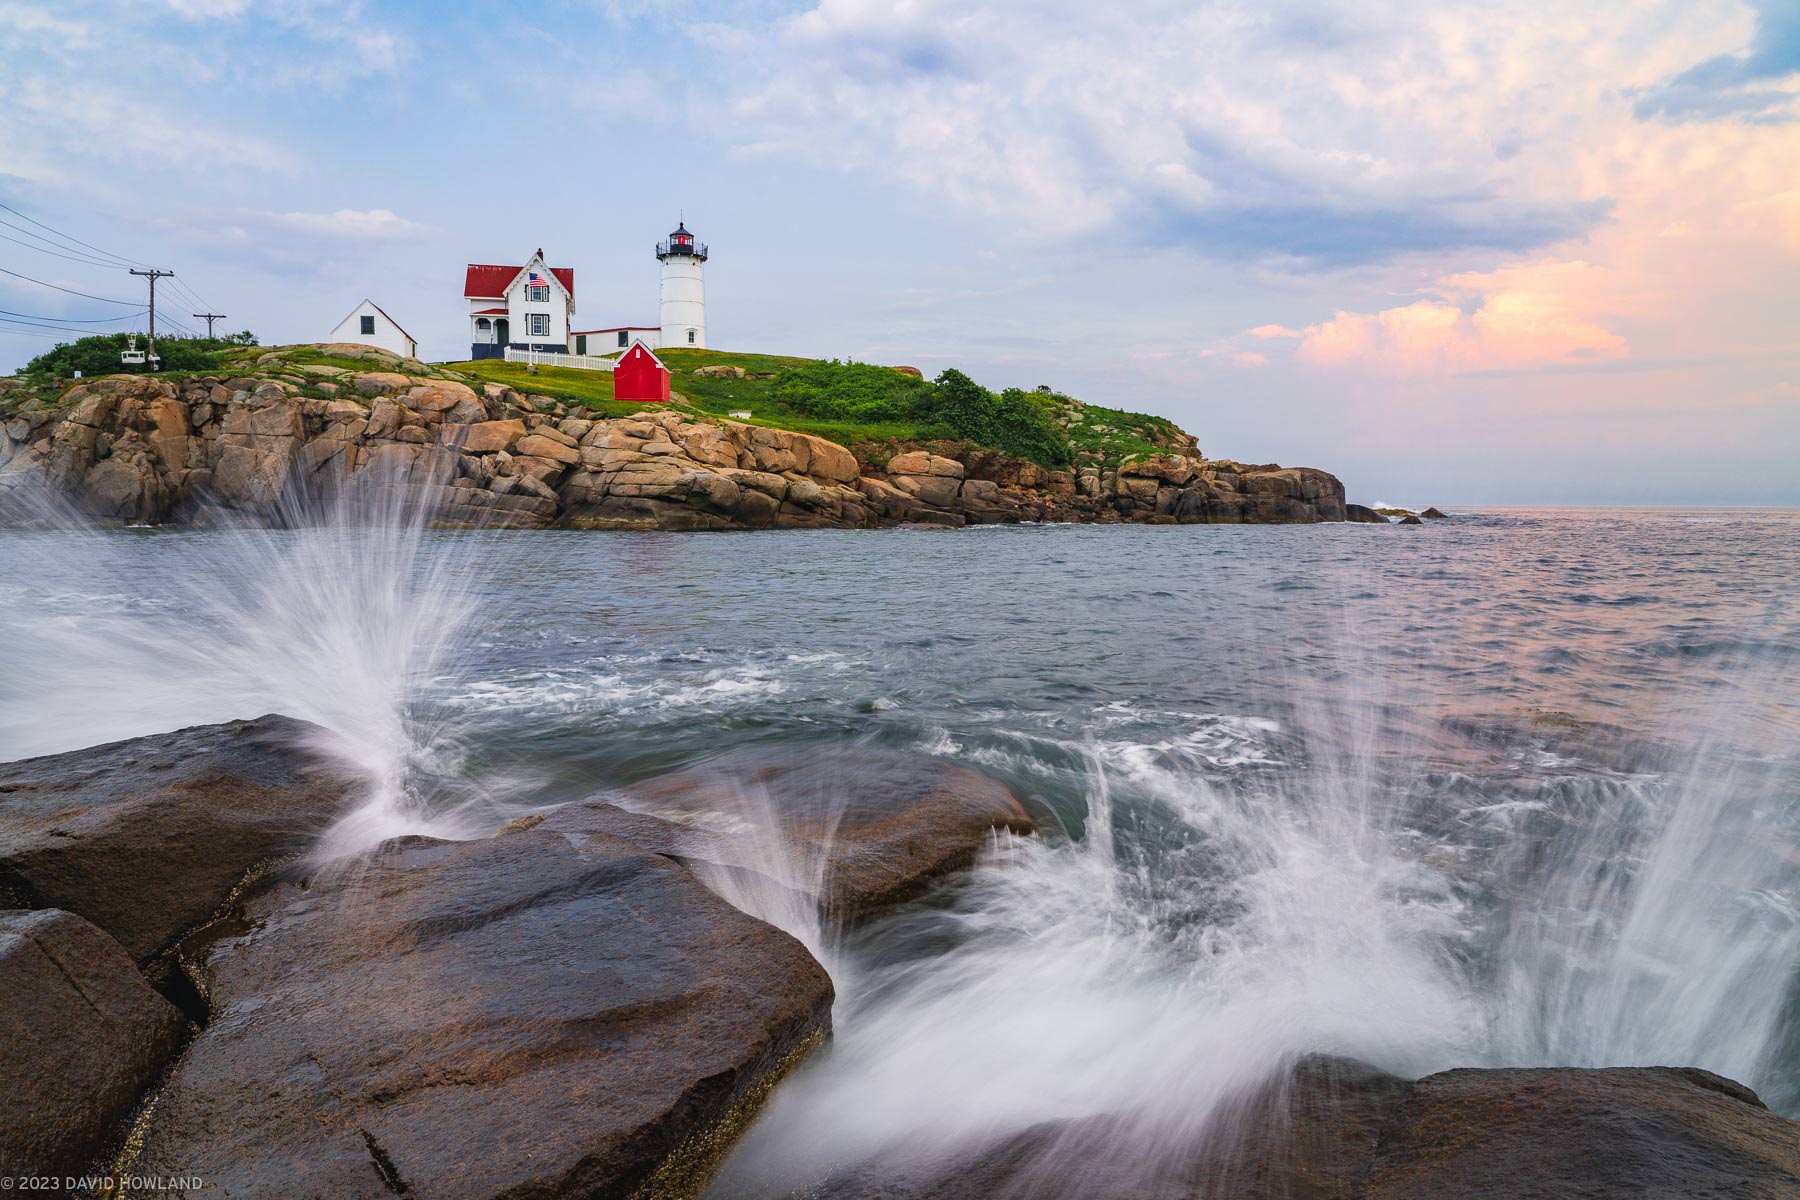 A sunset photo of waves crashing on the rocks of the coast of Maine with Nubble Lighthouse in the background.